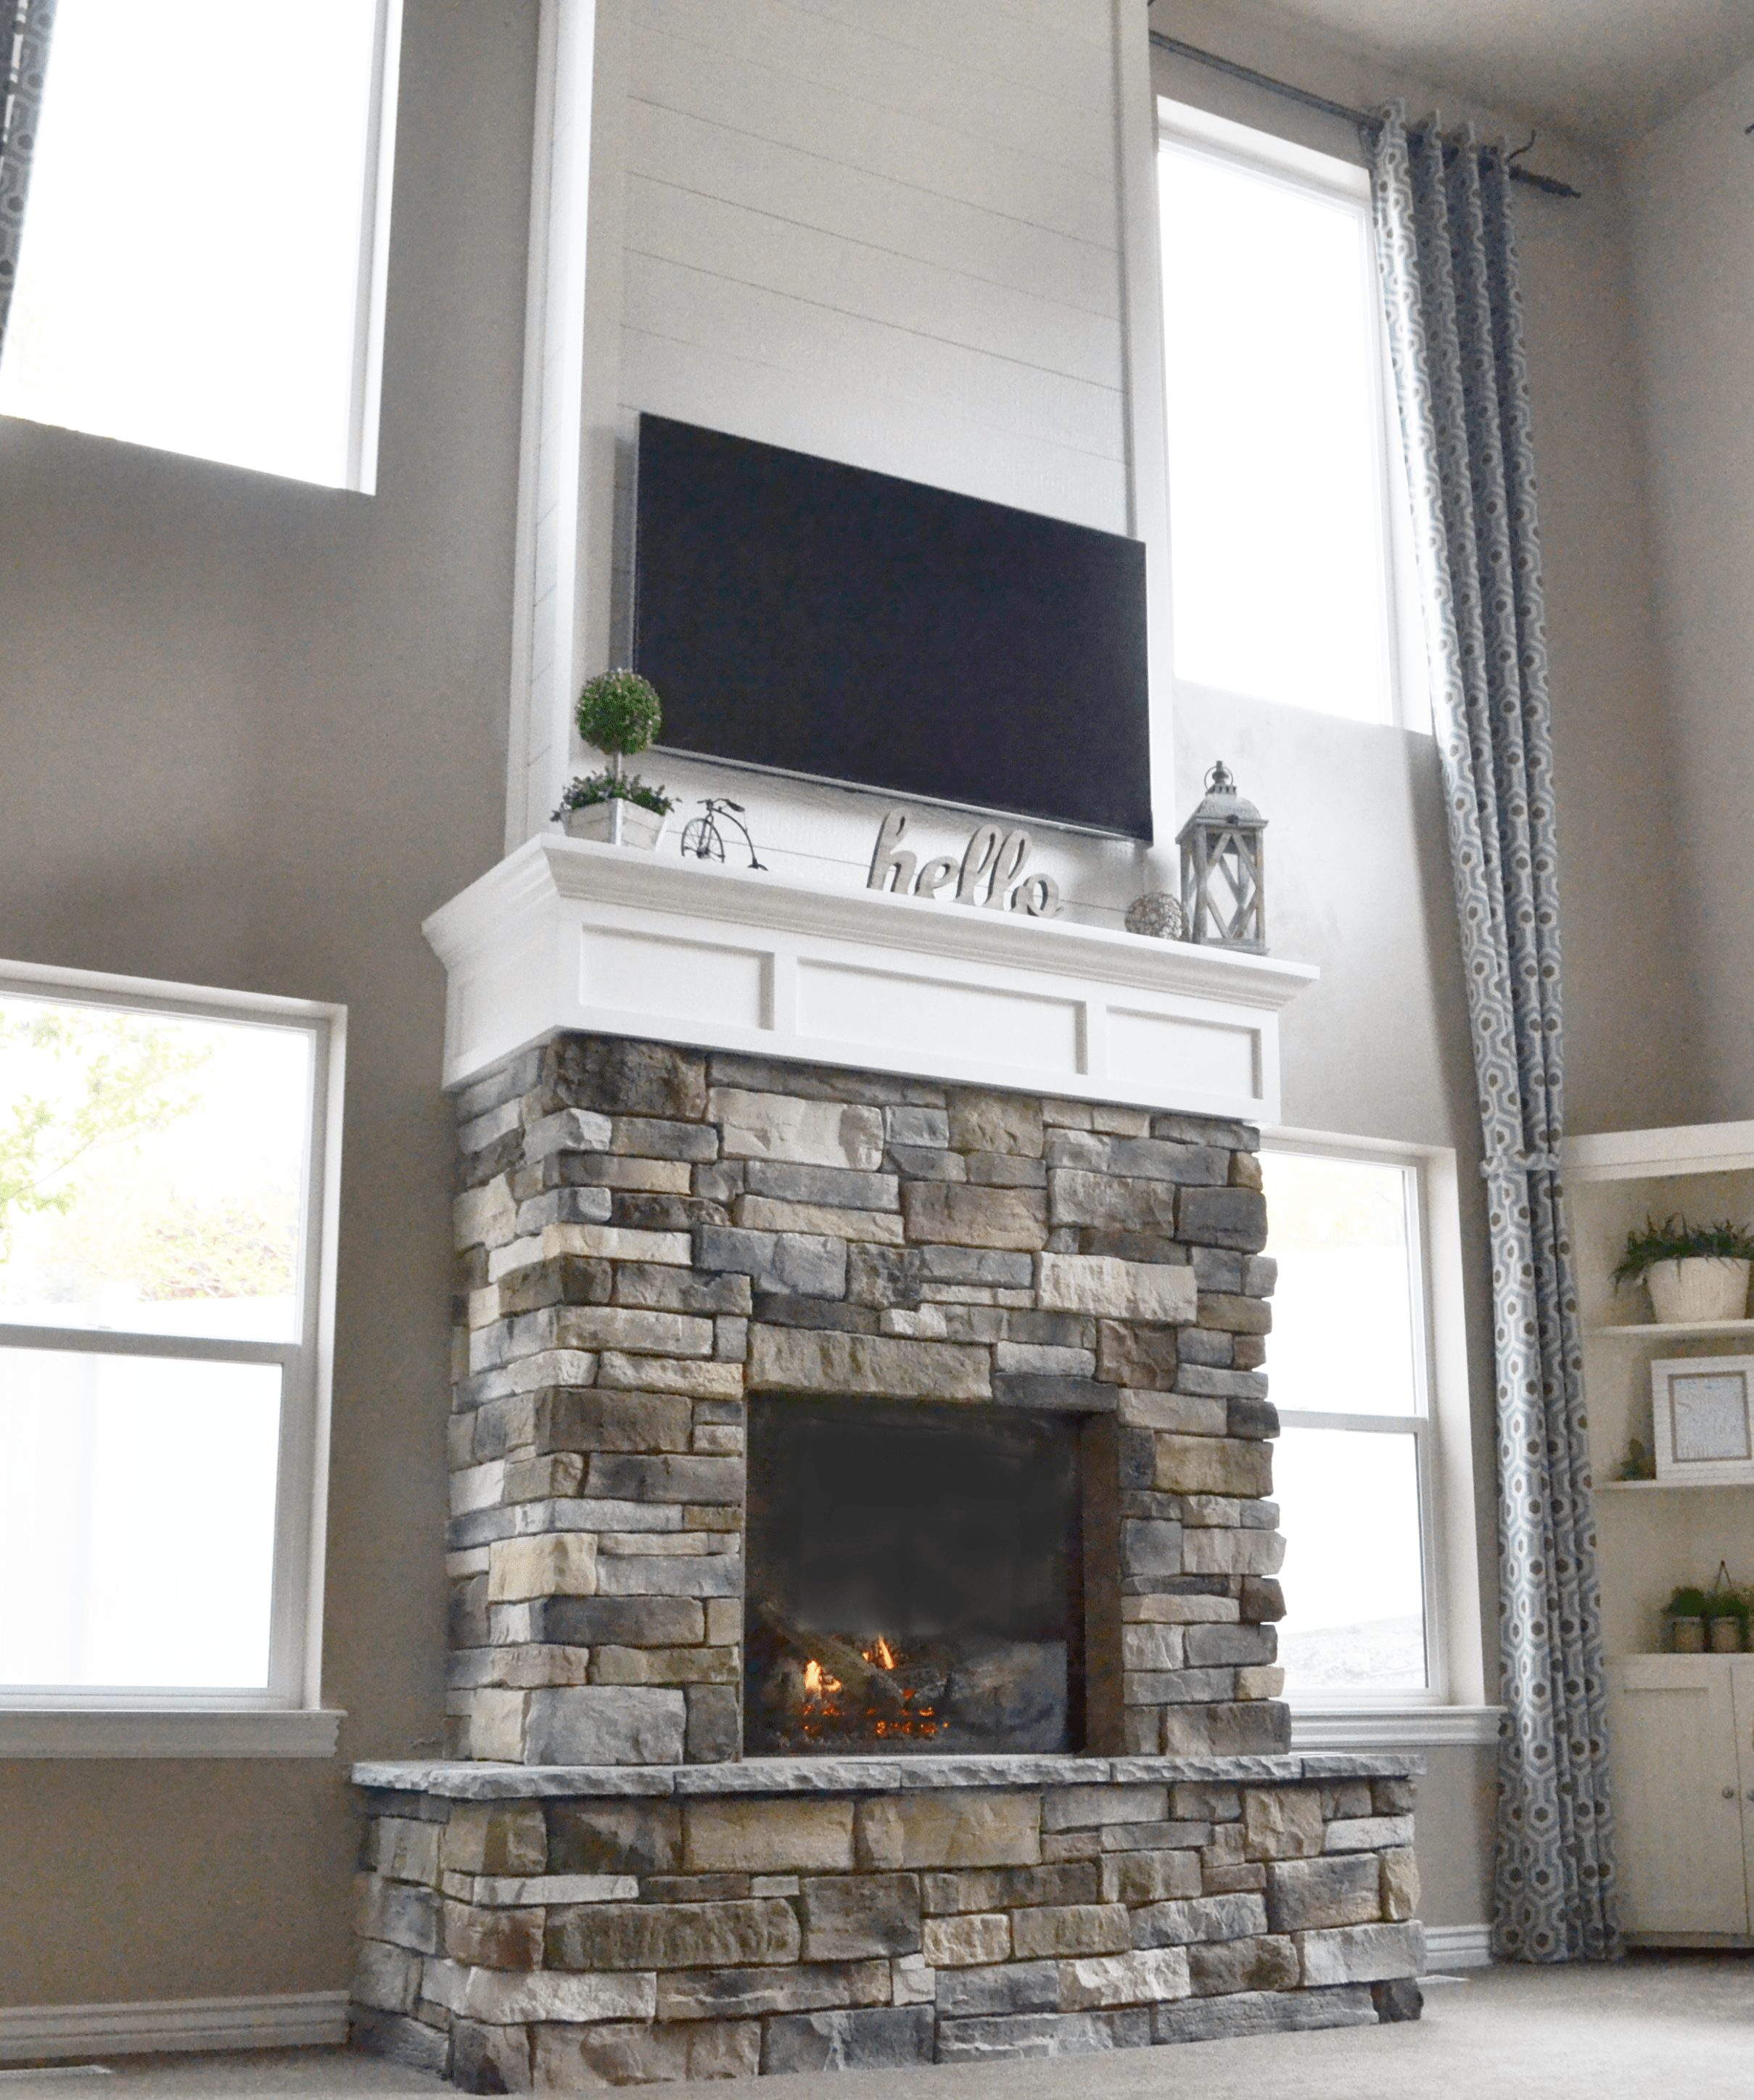 Cover Brick Fireplace with Stone Lovely Diy Fireplace with Stone & Shiplap